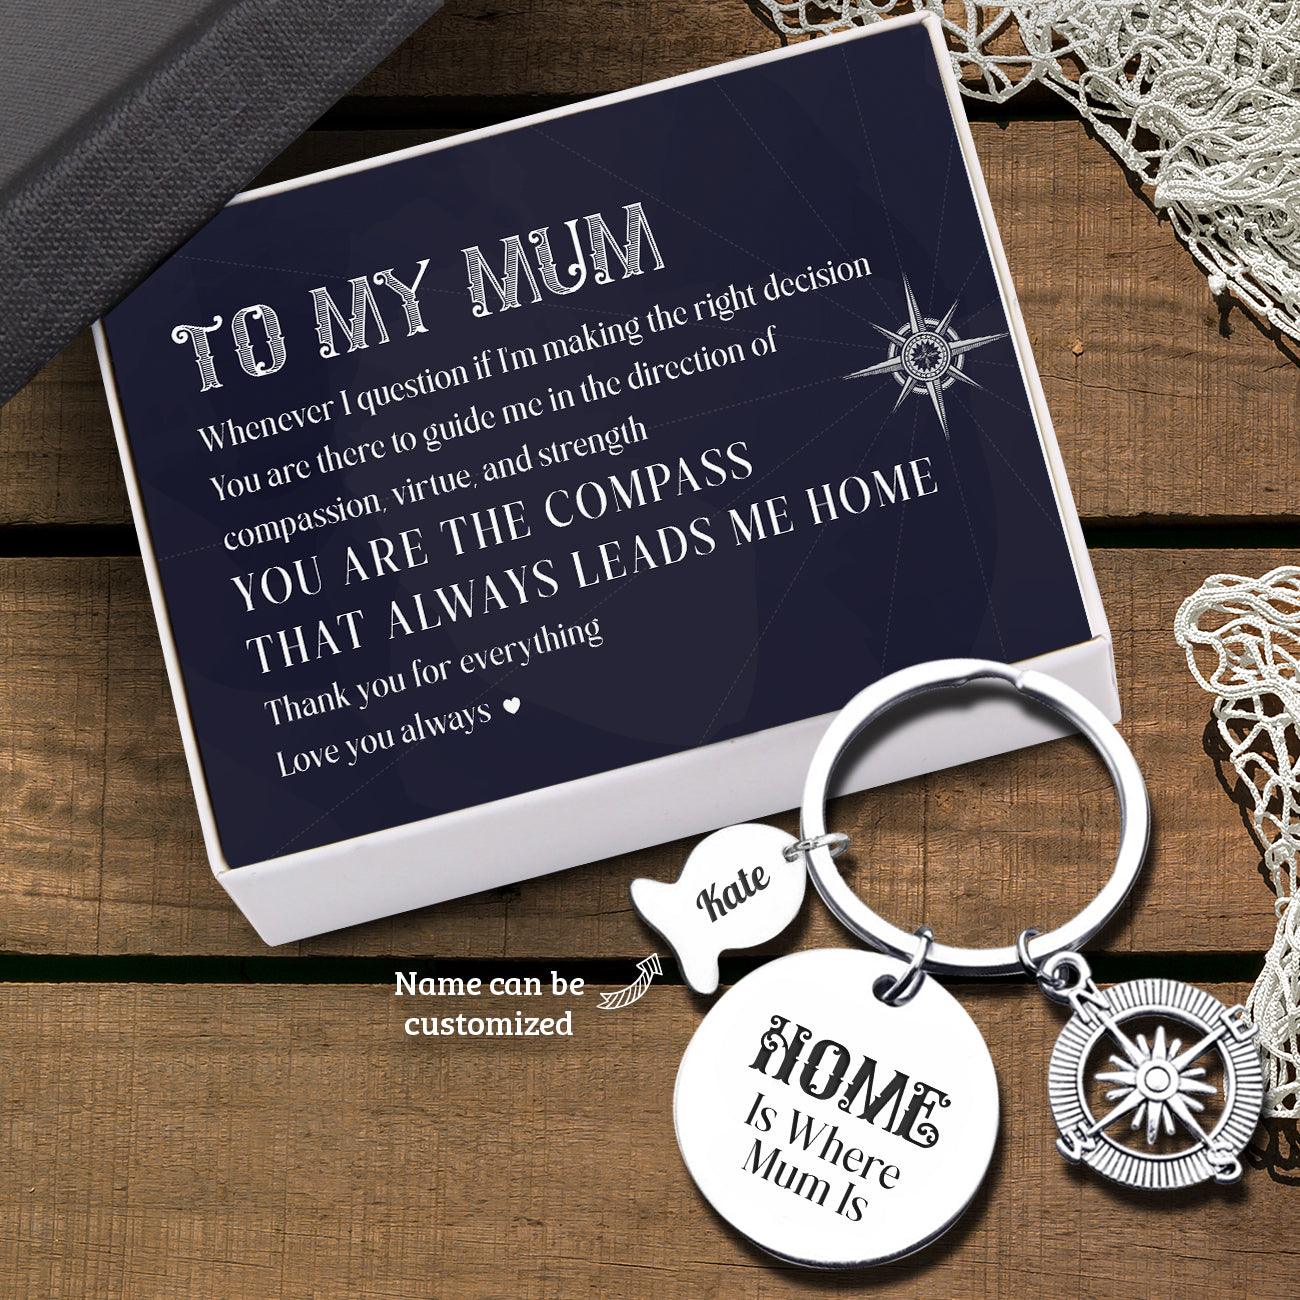 Personalised Fishing Compass Keychain - Fishing - To My Mum - You Are The Compass - Augkwb19003 - Gifts Holder